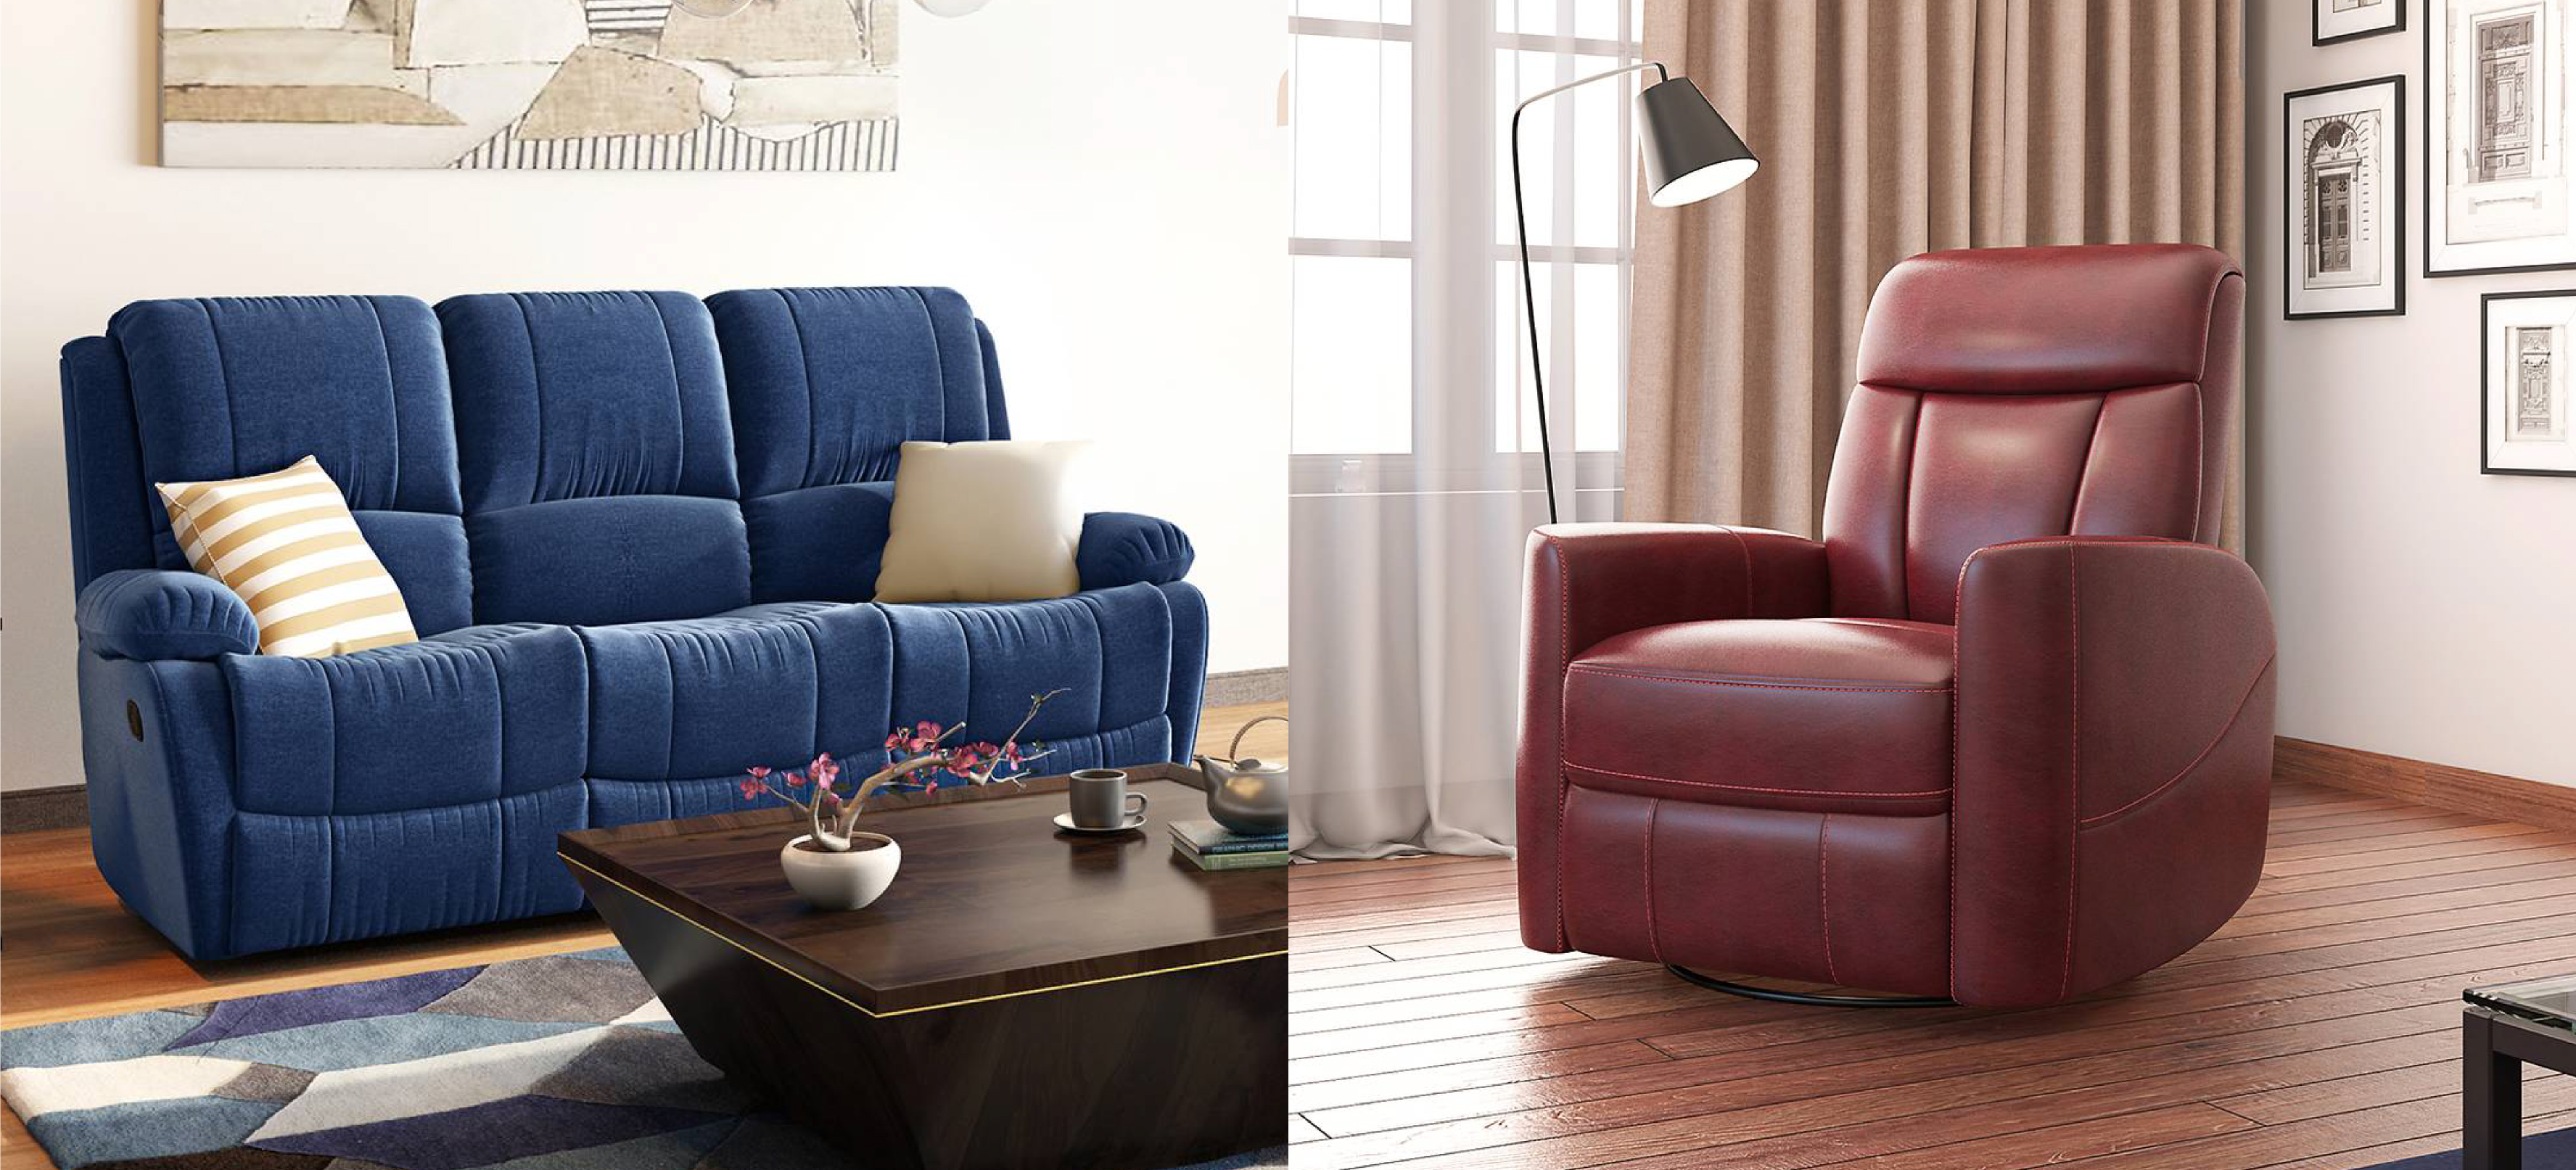 Fabric Vs Leather Recliner Which Is Ideal For You - Urban Ladder